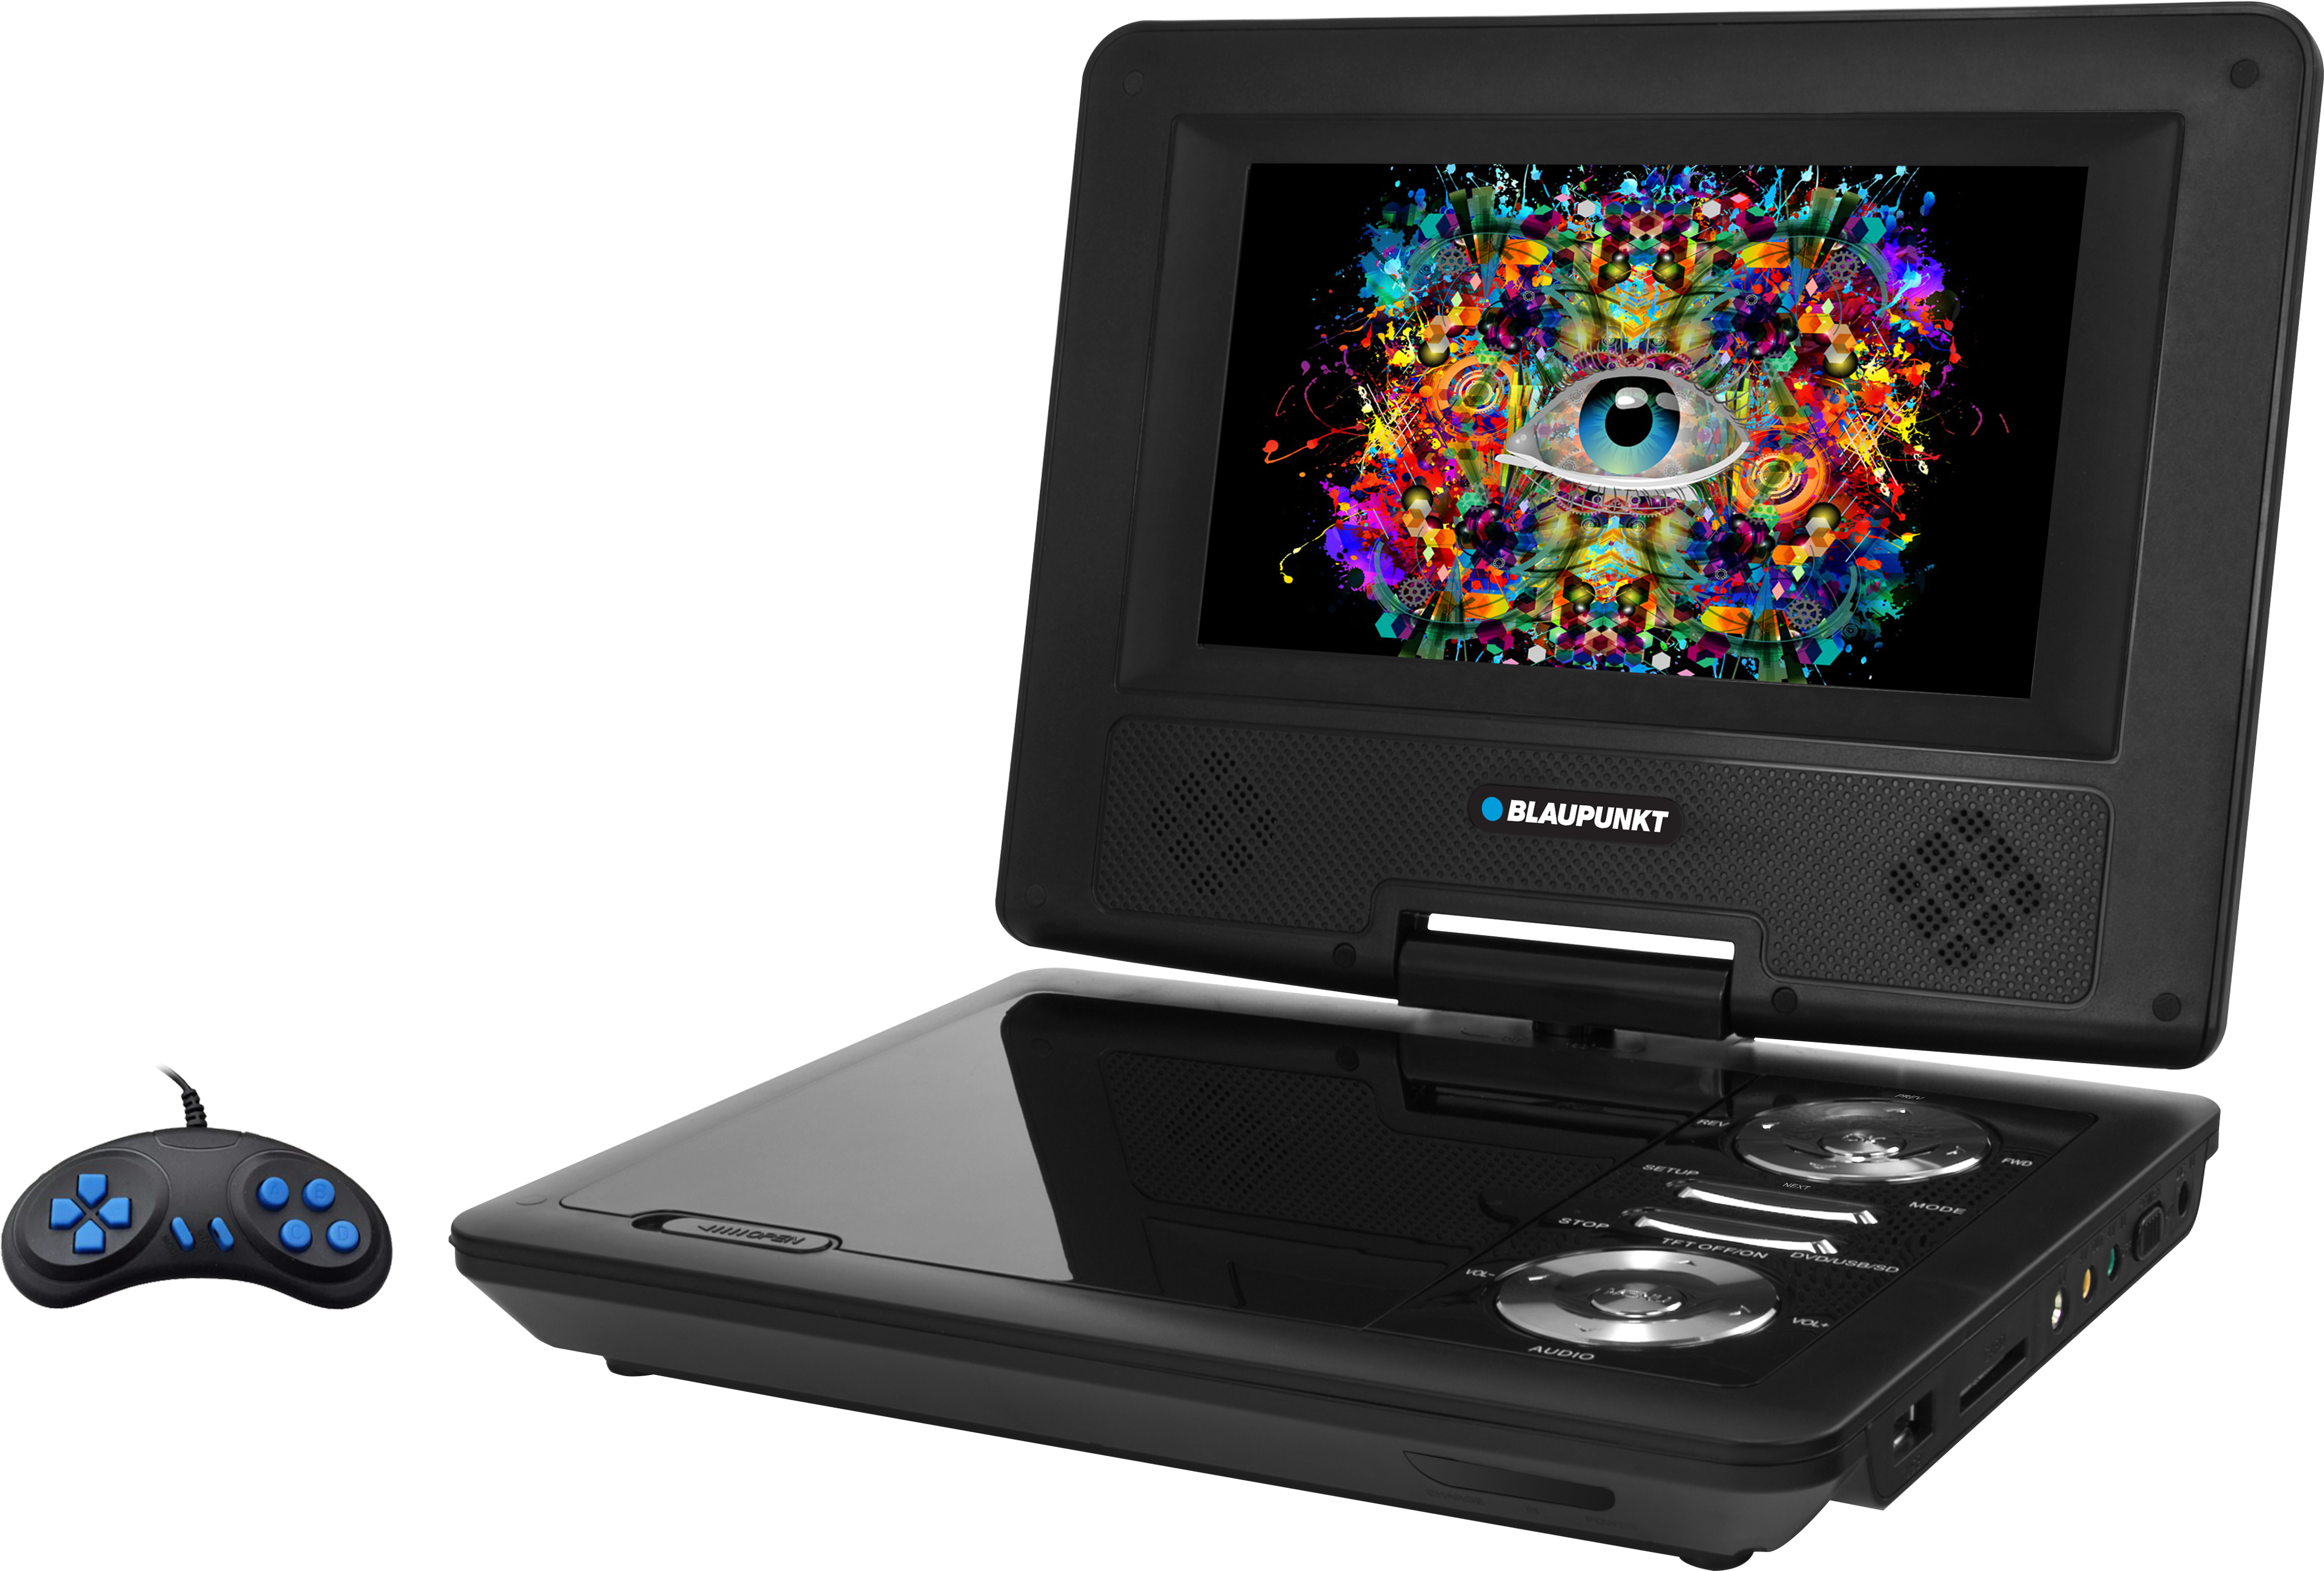 A Black Portable Dvd Player With A Colorful Eye On The Screen